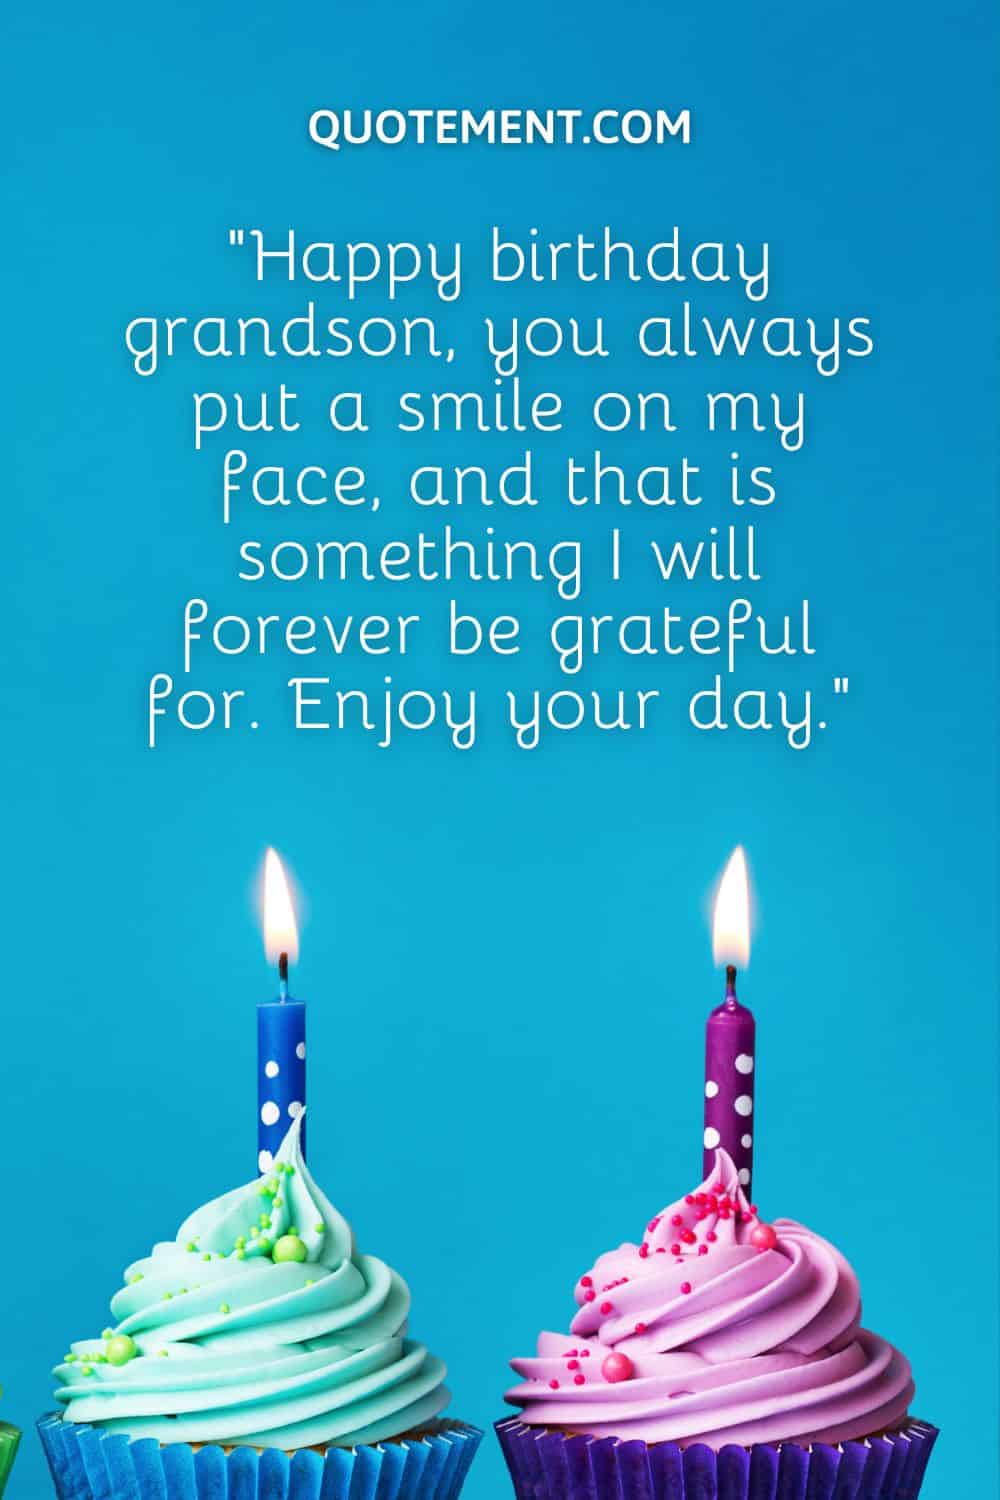 “Happy birthday grandson, you always put a smile on my face, and that is something I will forever be grateful for. Enjoy your day.”